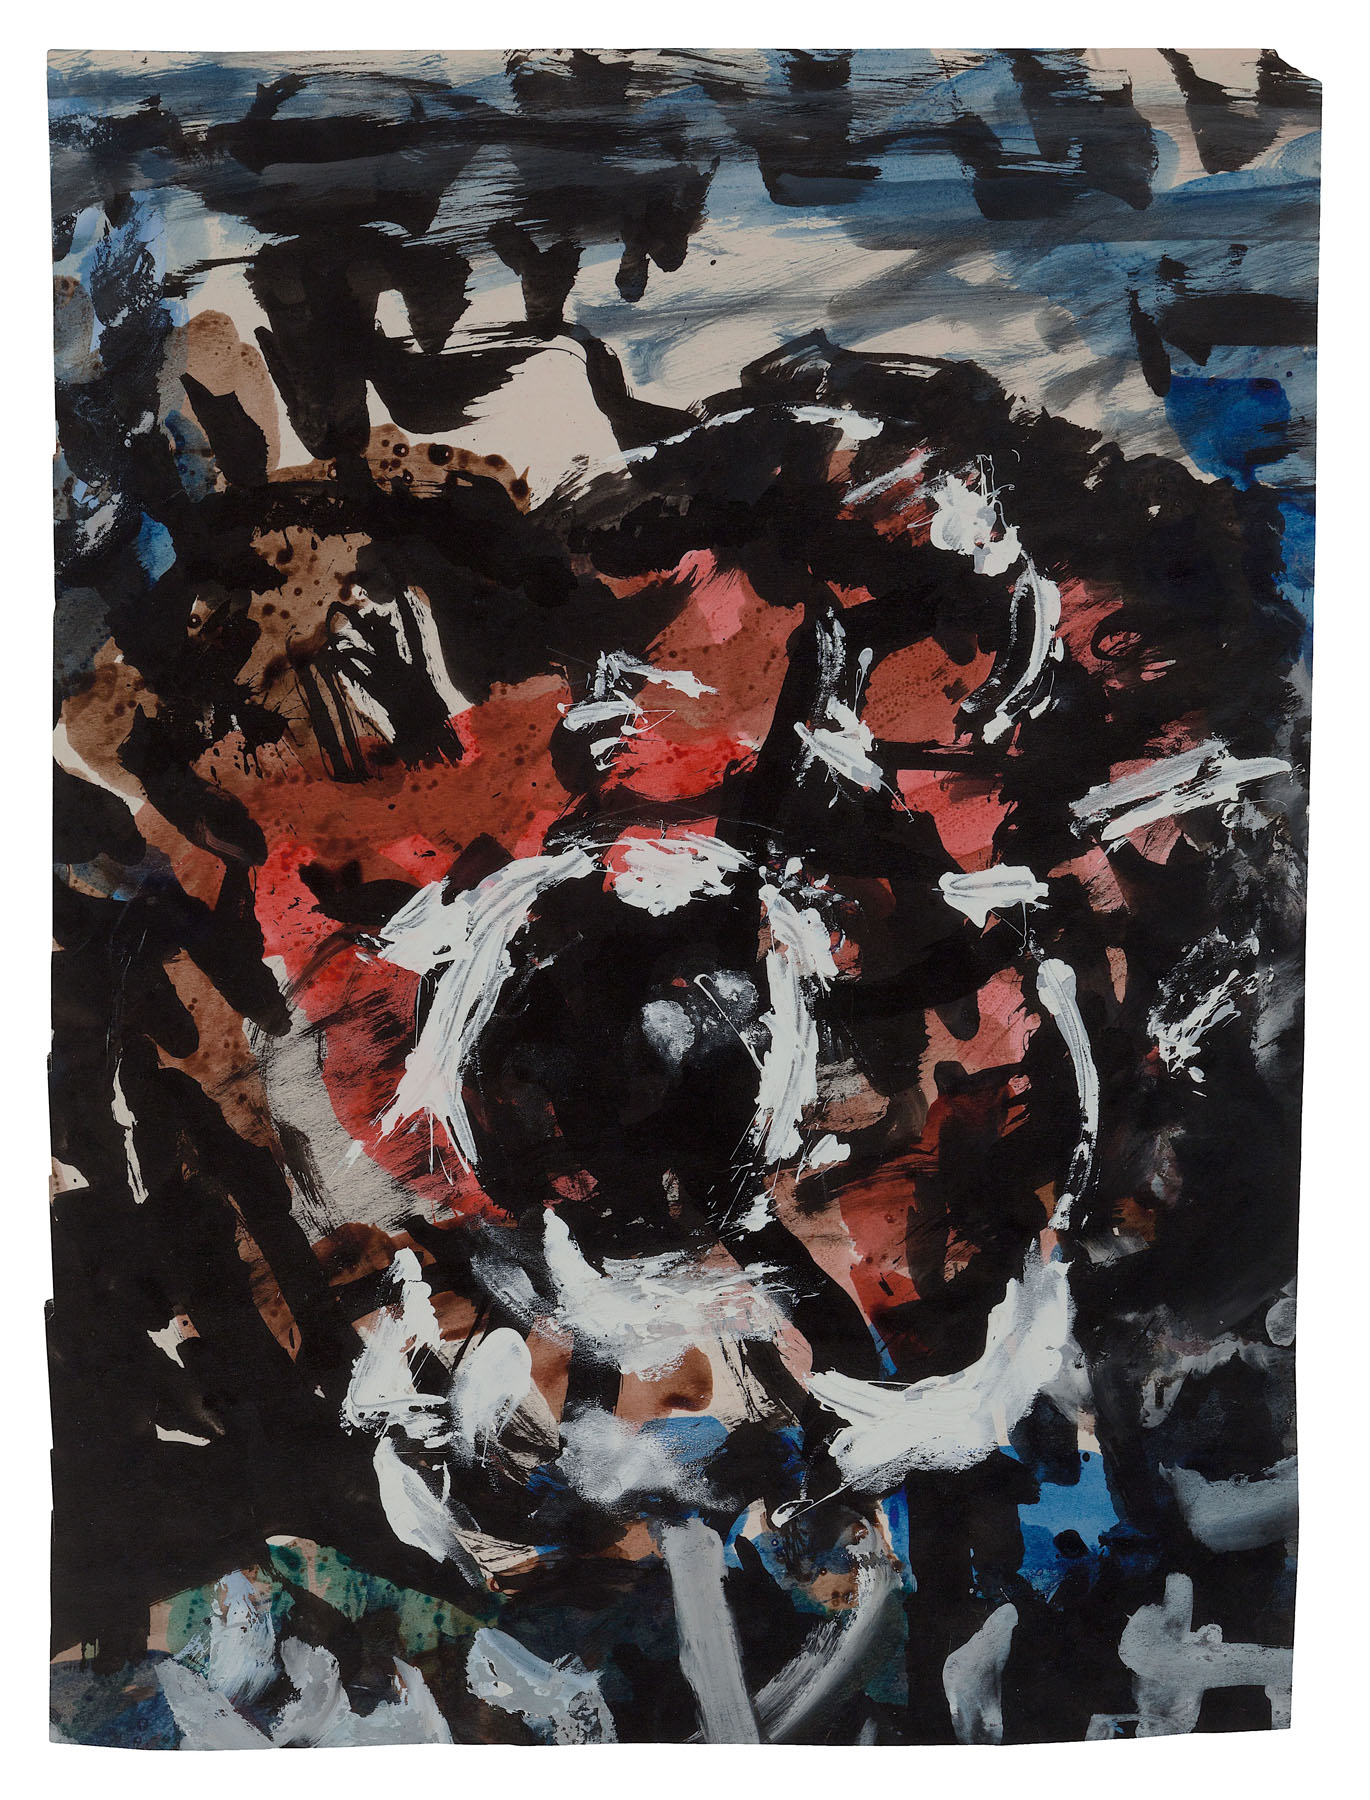 Flower, c. 1958. White gouache, black ink and watercolour on paper, 16.2 x 12 in. (41 x 30.5 cm). Private collection. Photo Malcolm Varon ©Bianca Stock